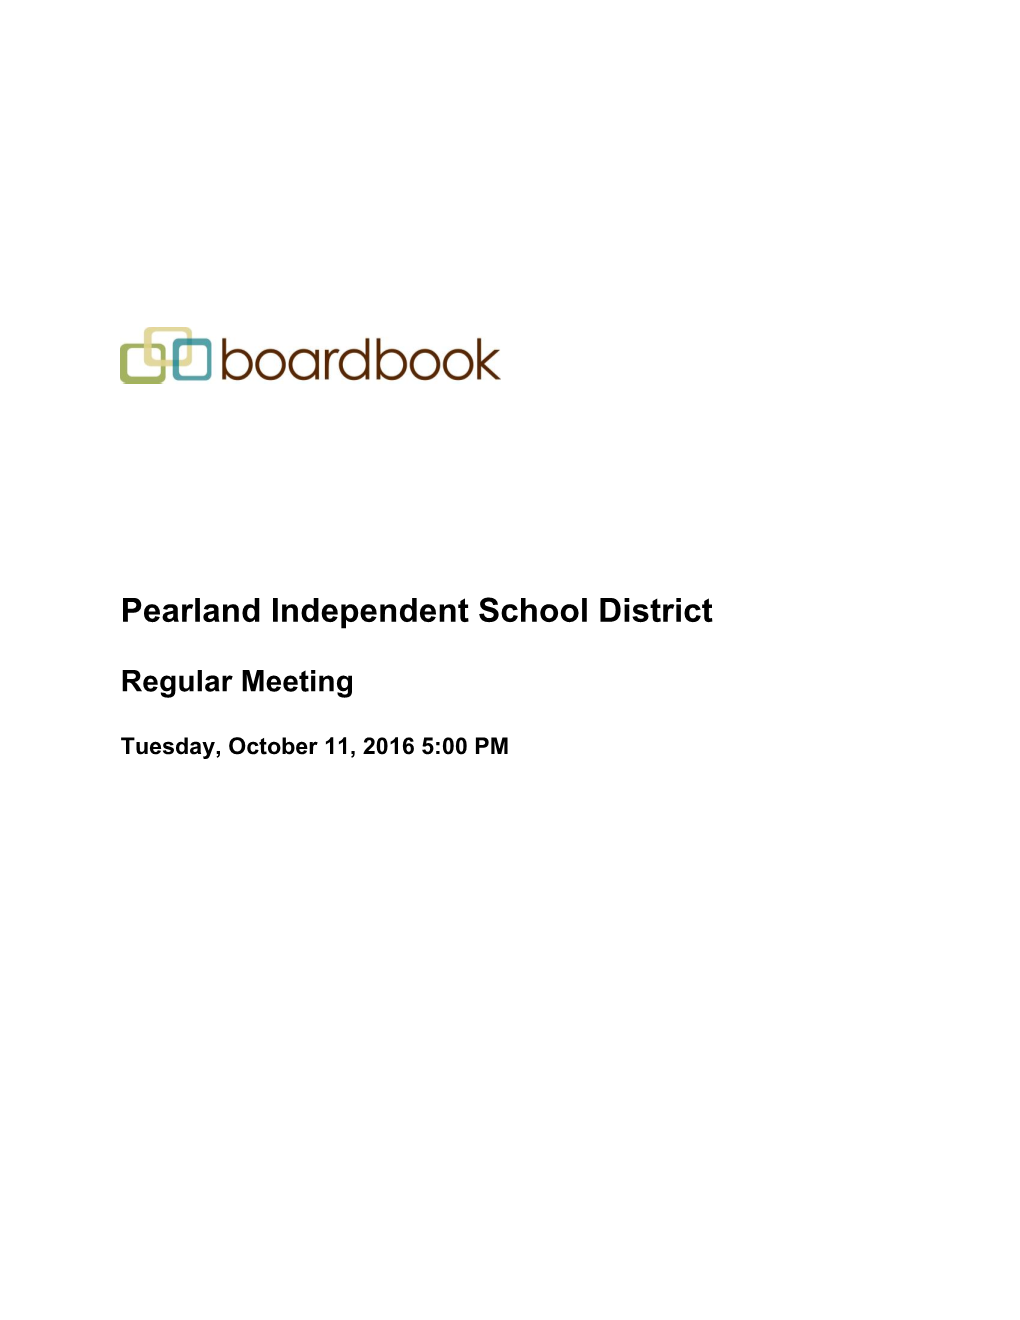 Pearland Independent School District Regular Meeting of the Board of Trustees September 13, 2016